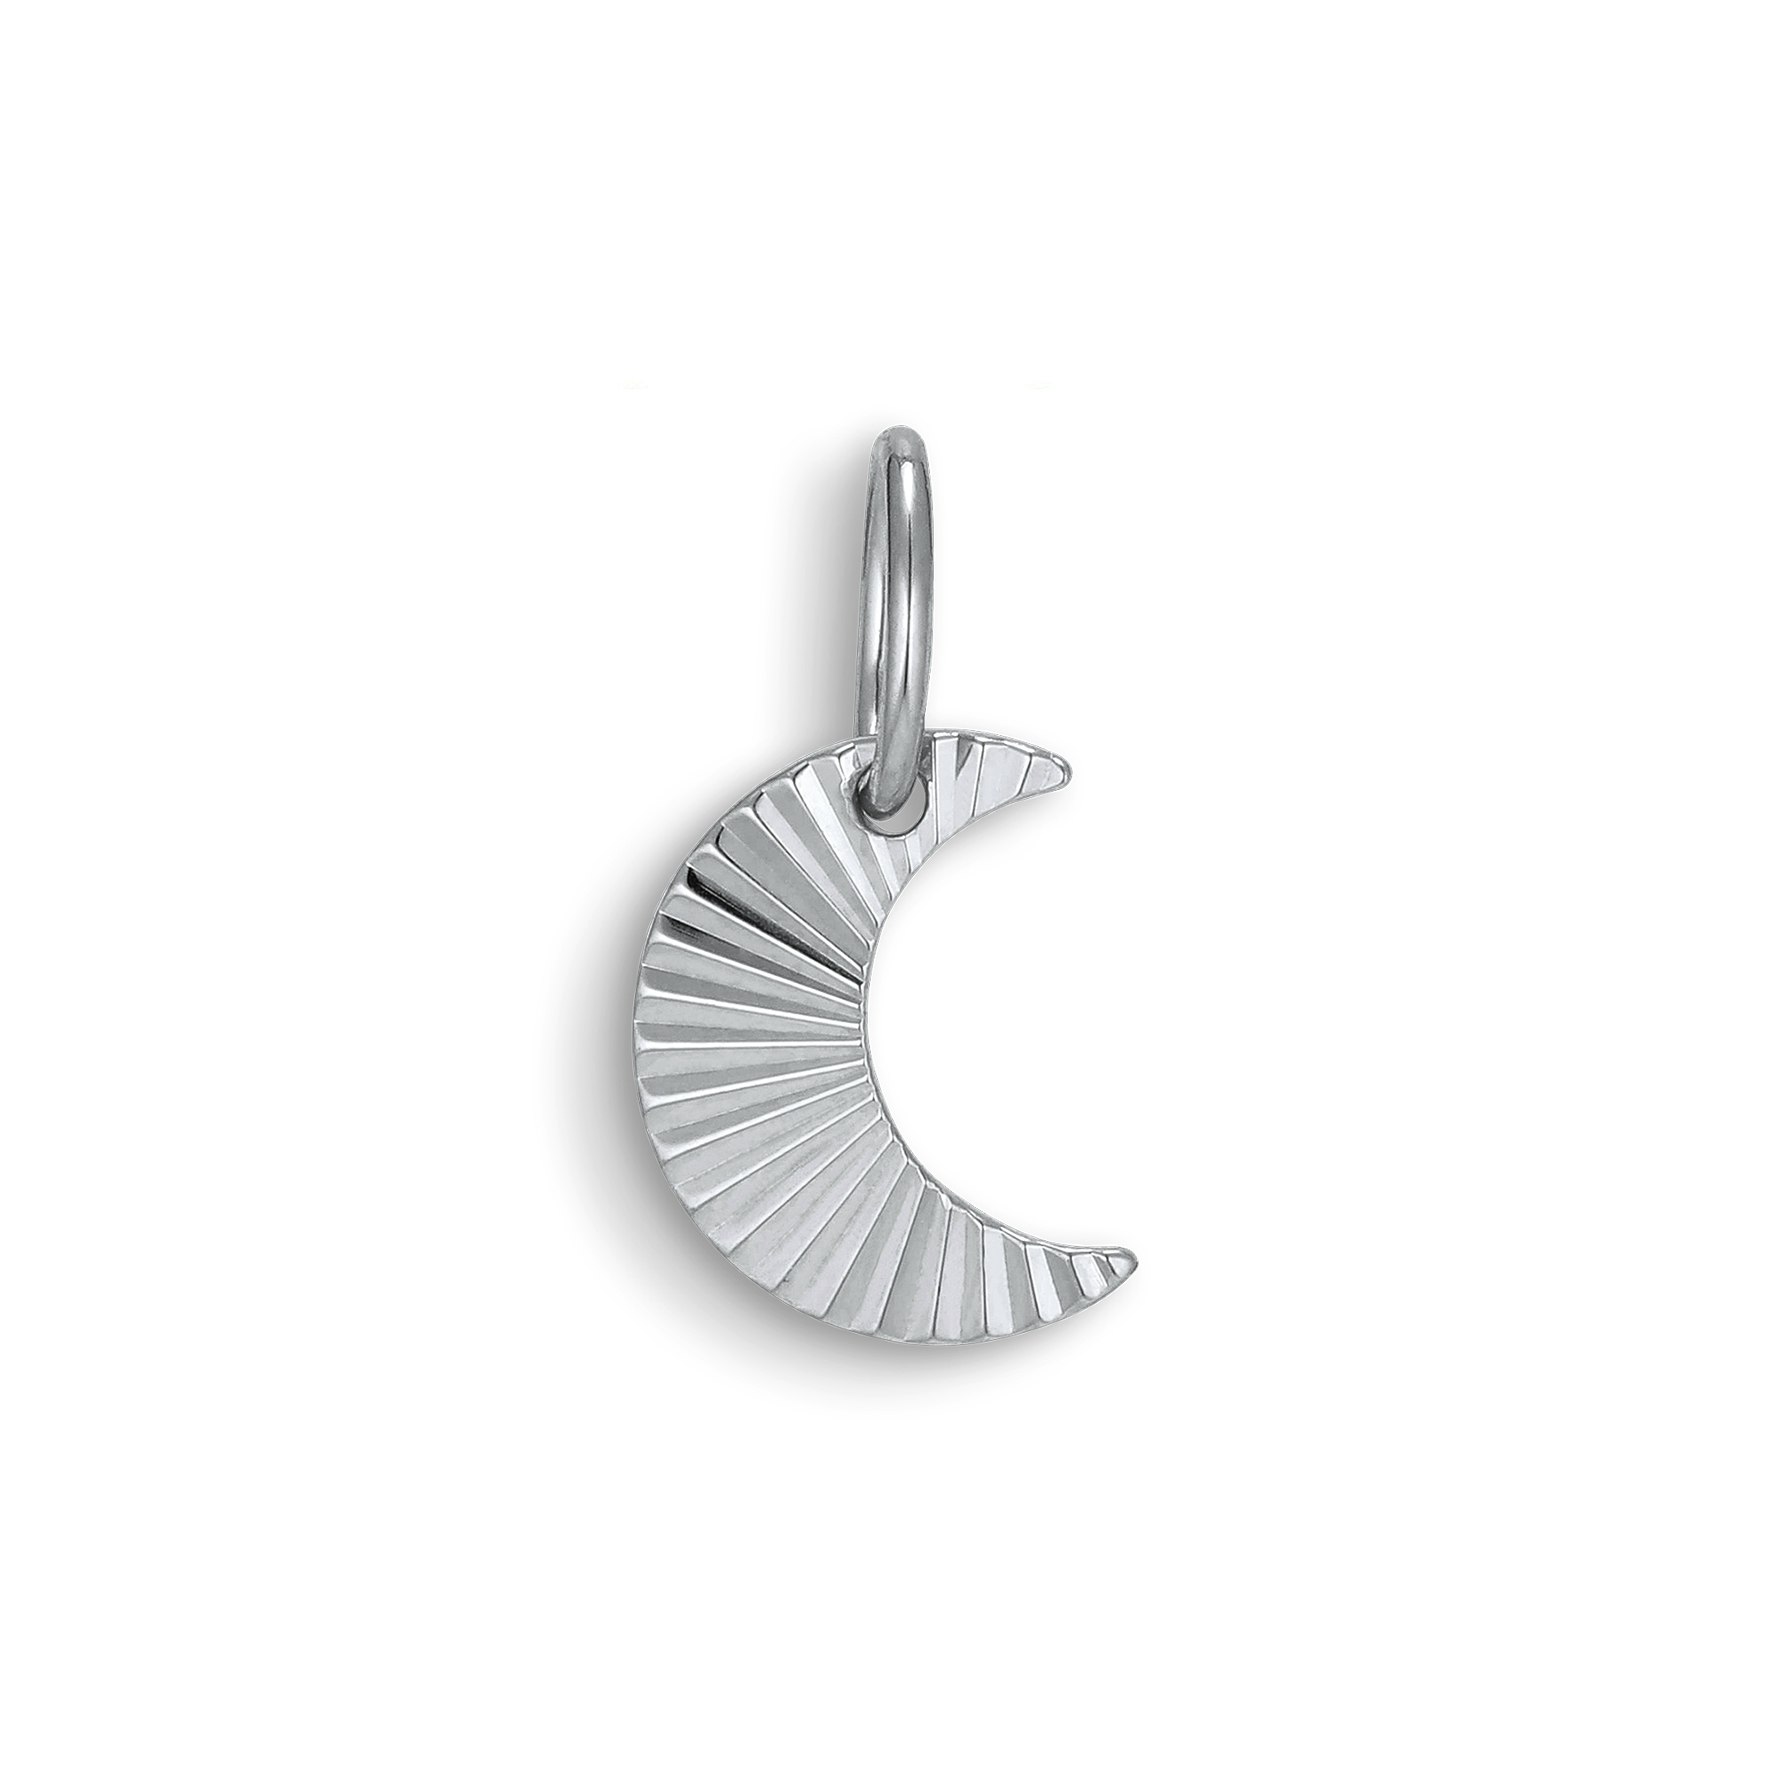 Reflection Half Moon Pendant from Jane Kønig in Silver Sterling 925